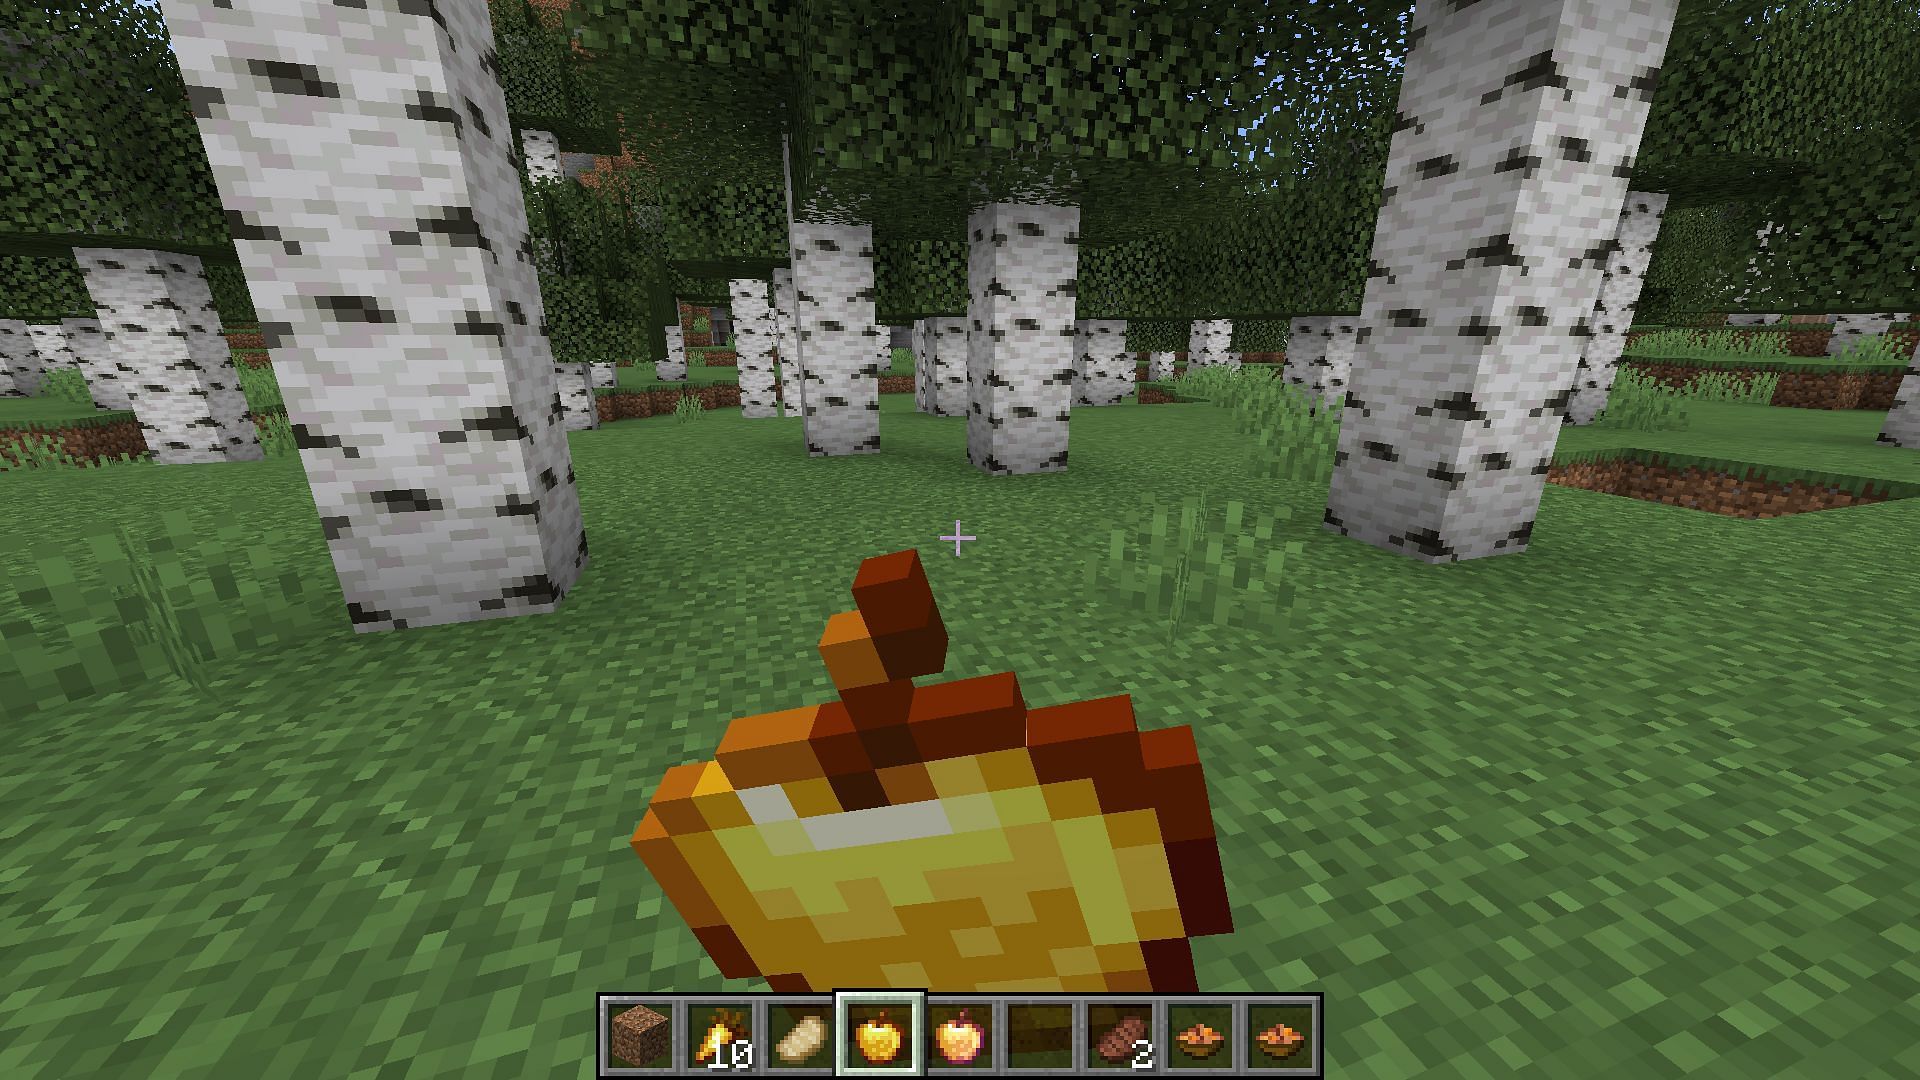 Golden apples can save players from the Wither in Minecraft Bedrock Edition (Image via Mojang)